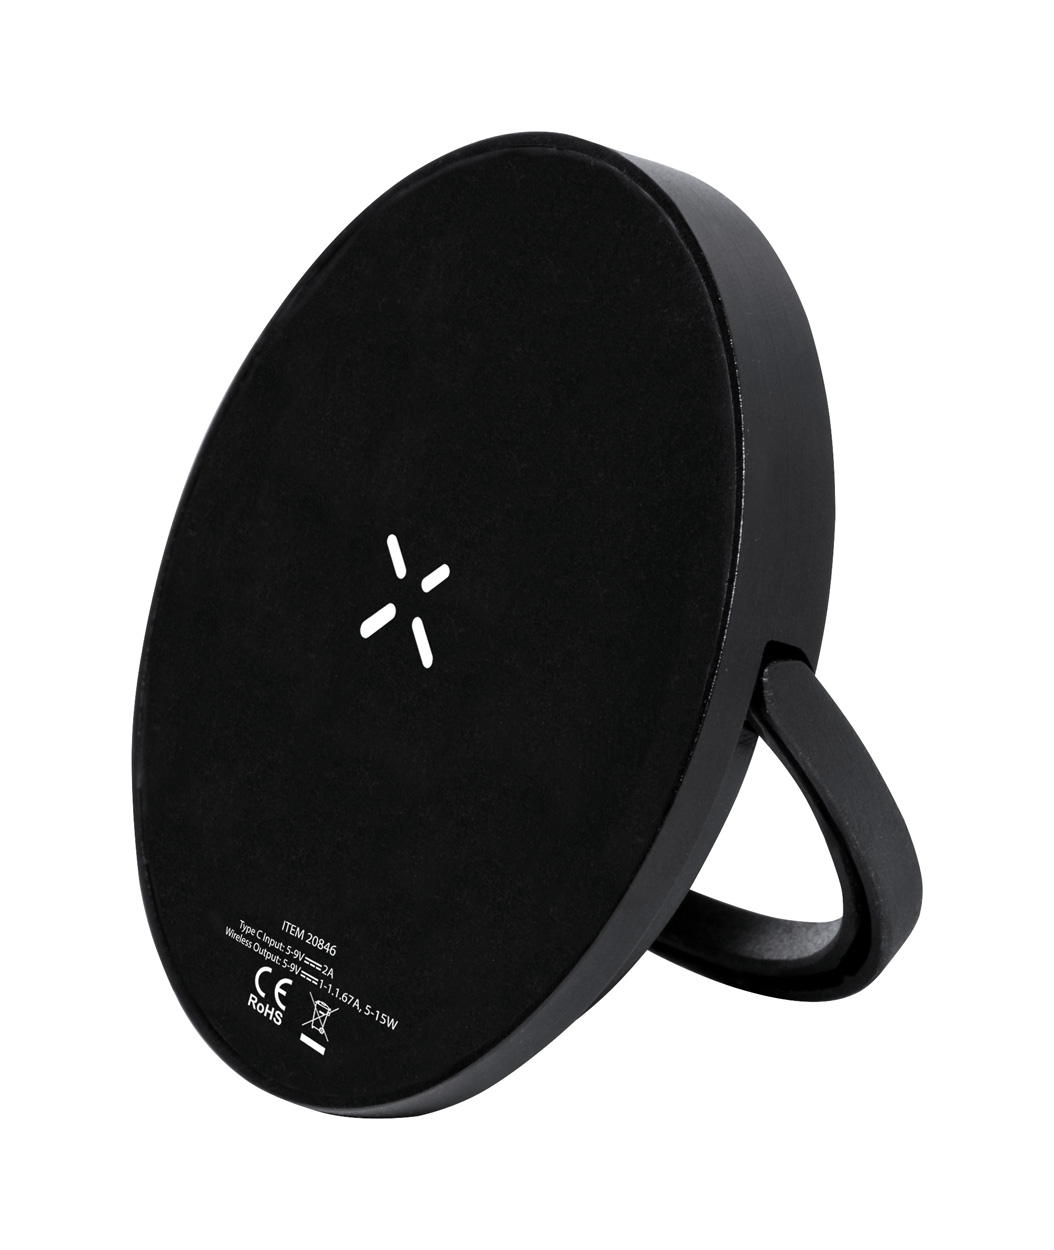 Bellmer Magnetic Wireless Charger - black